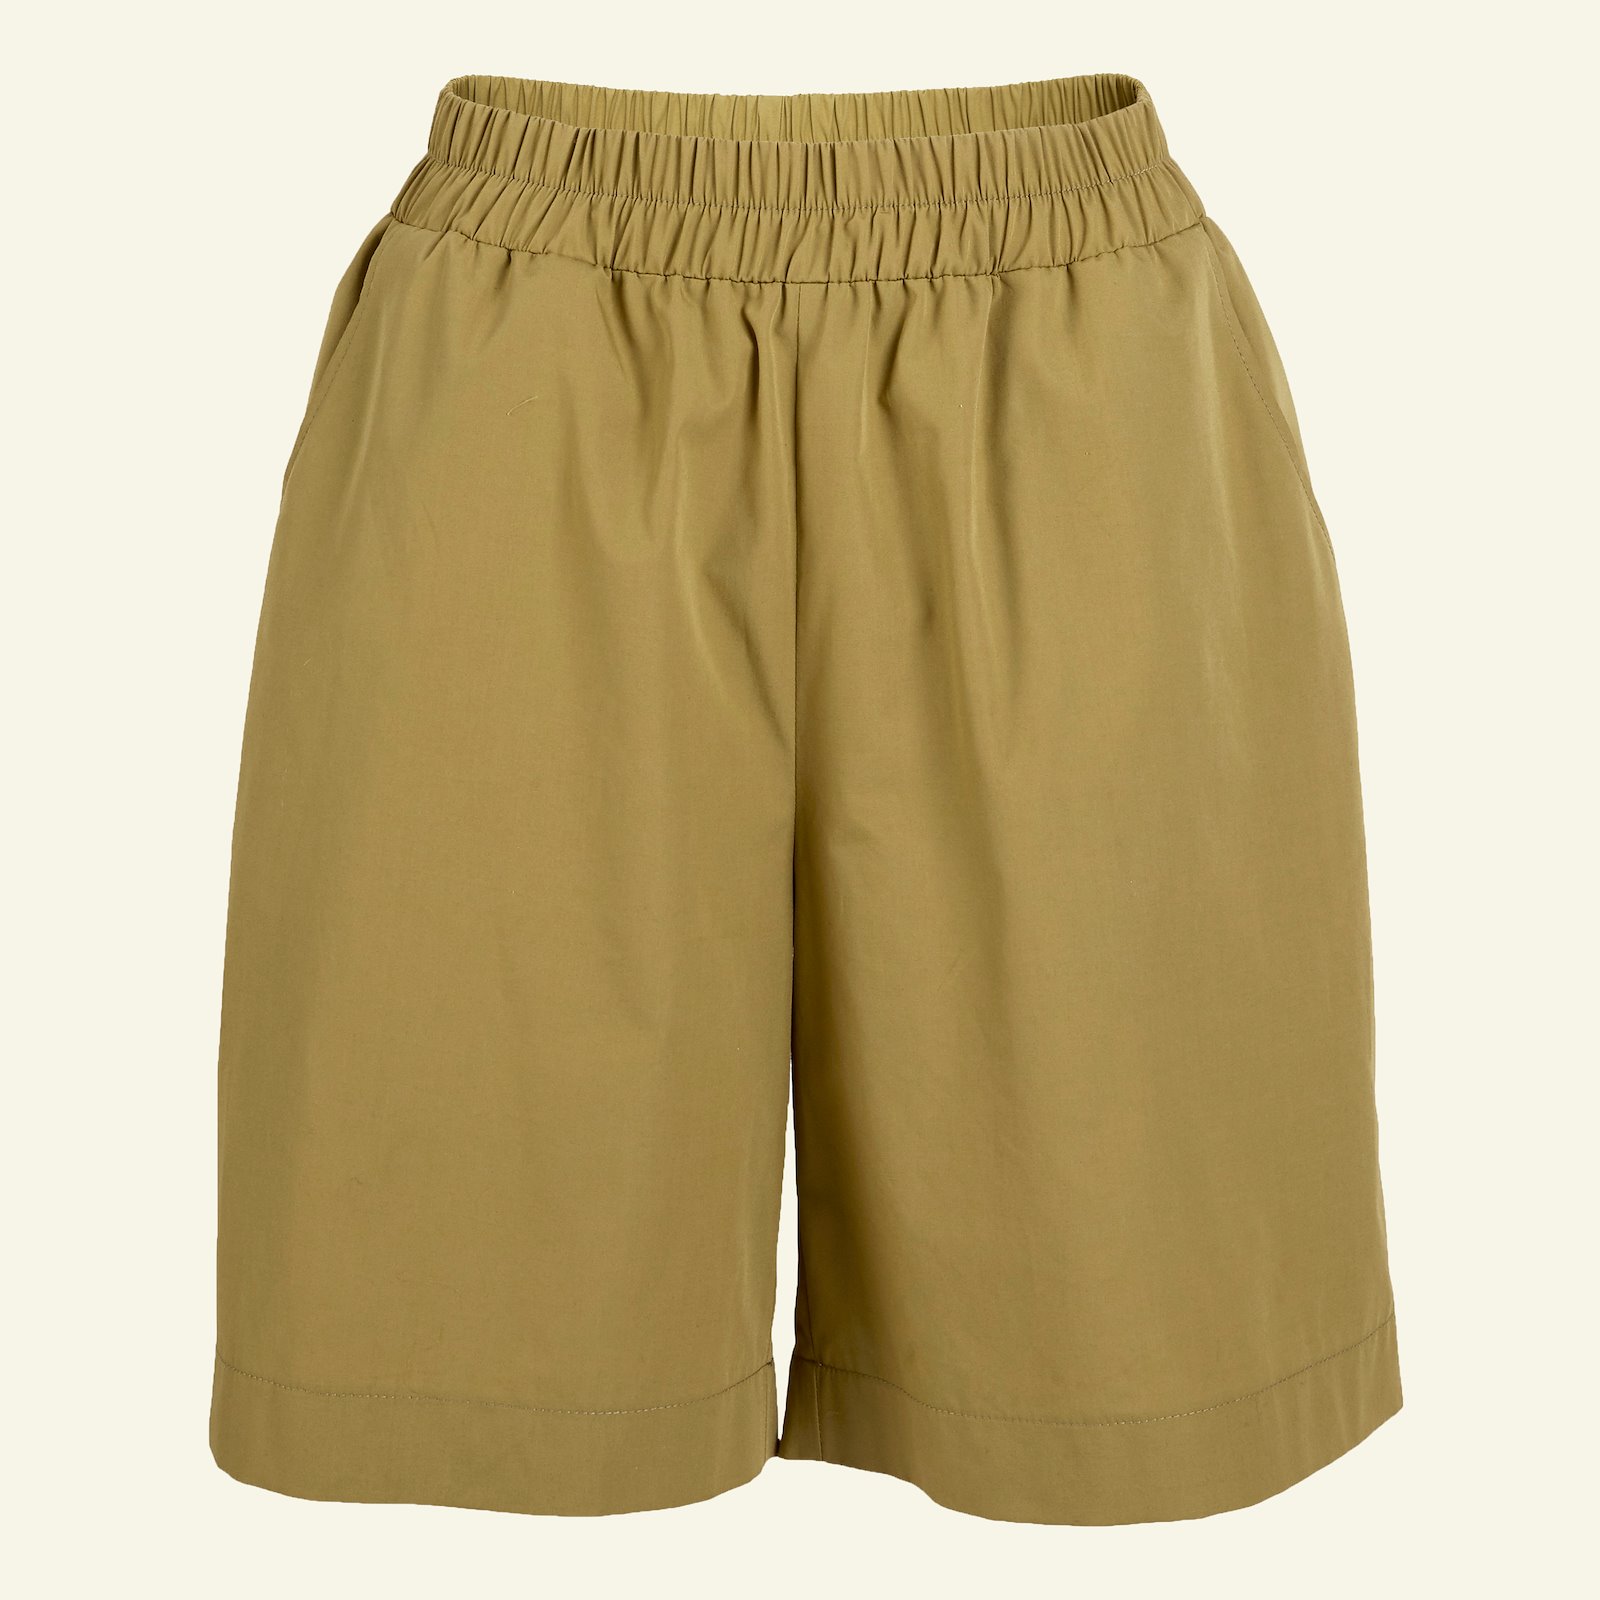 Wide trousers/shorts w. pockets 6-18 p20051_501926_sskit